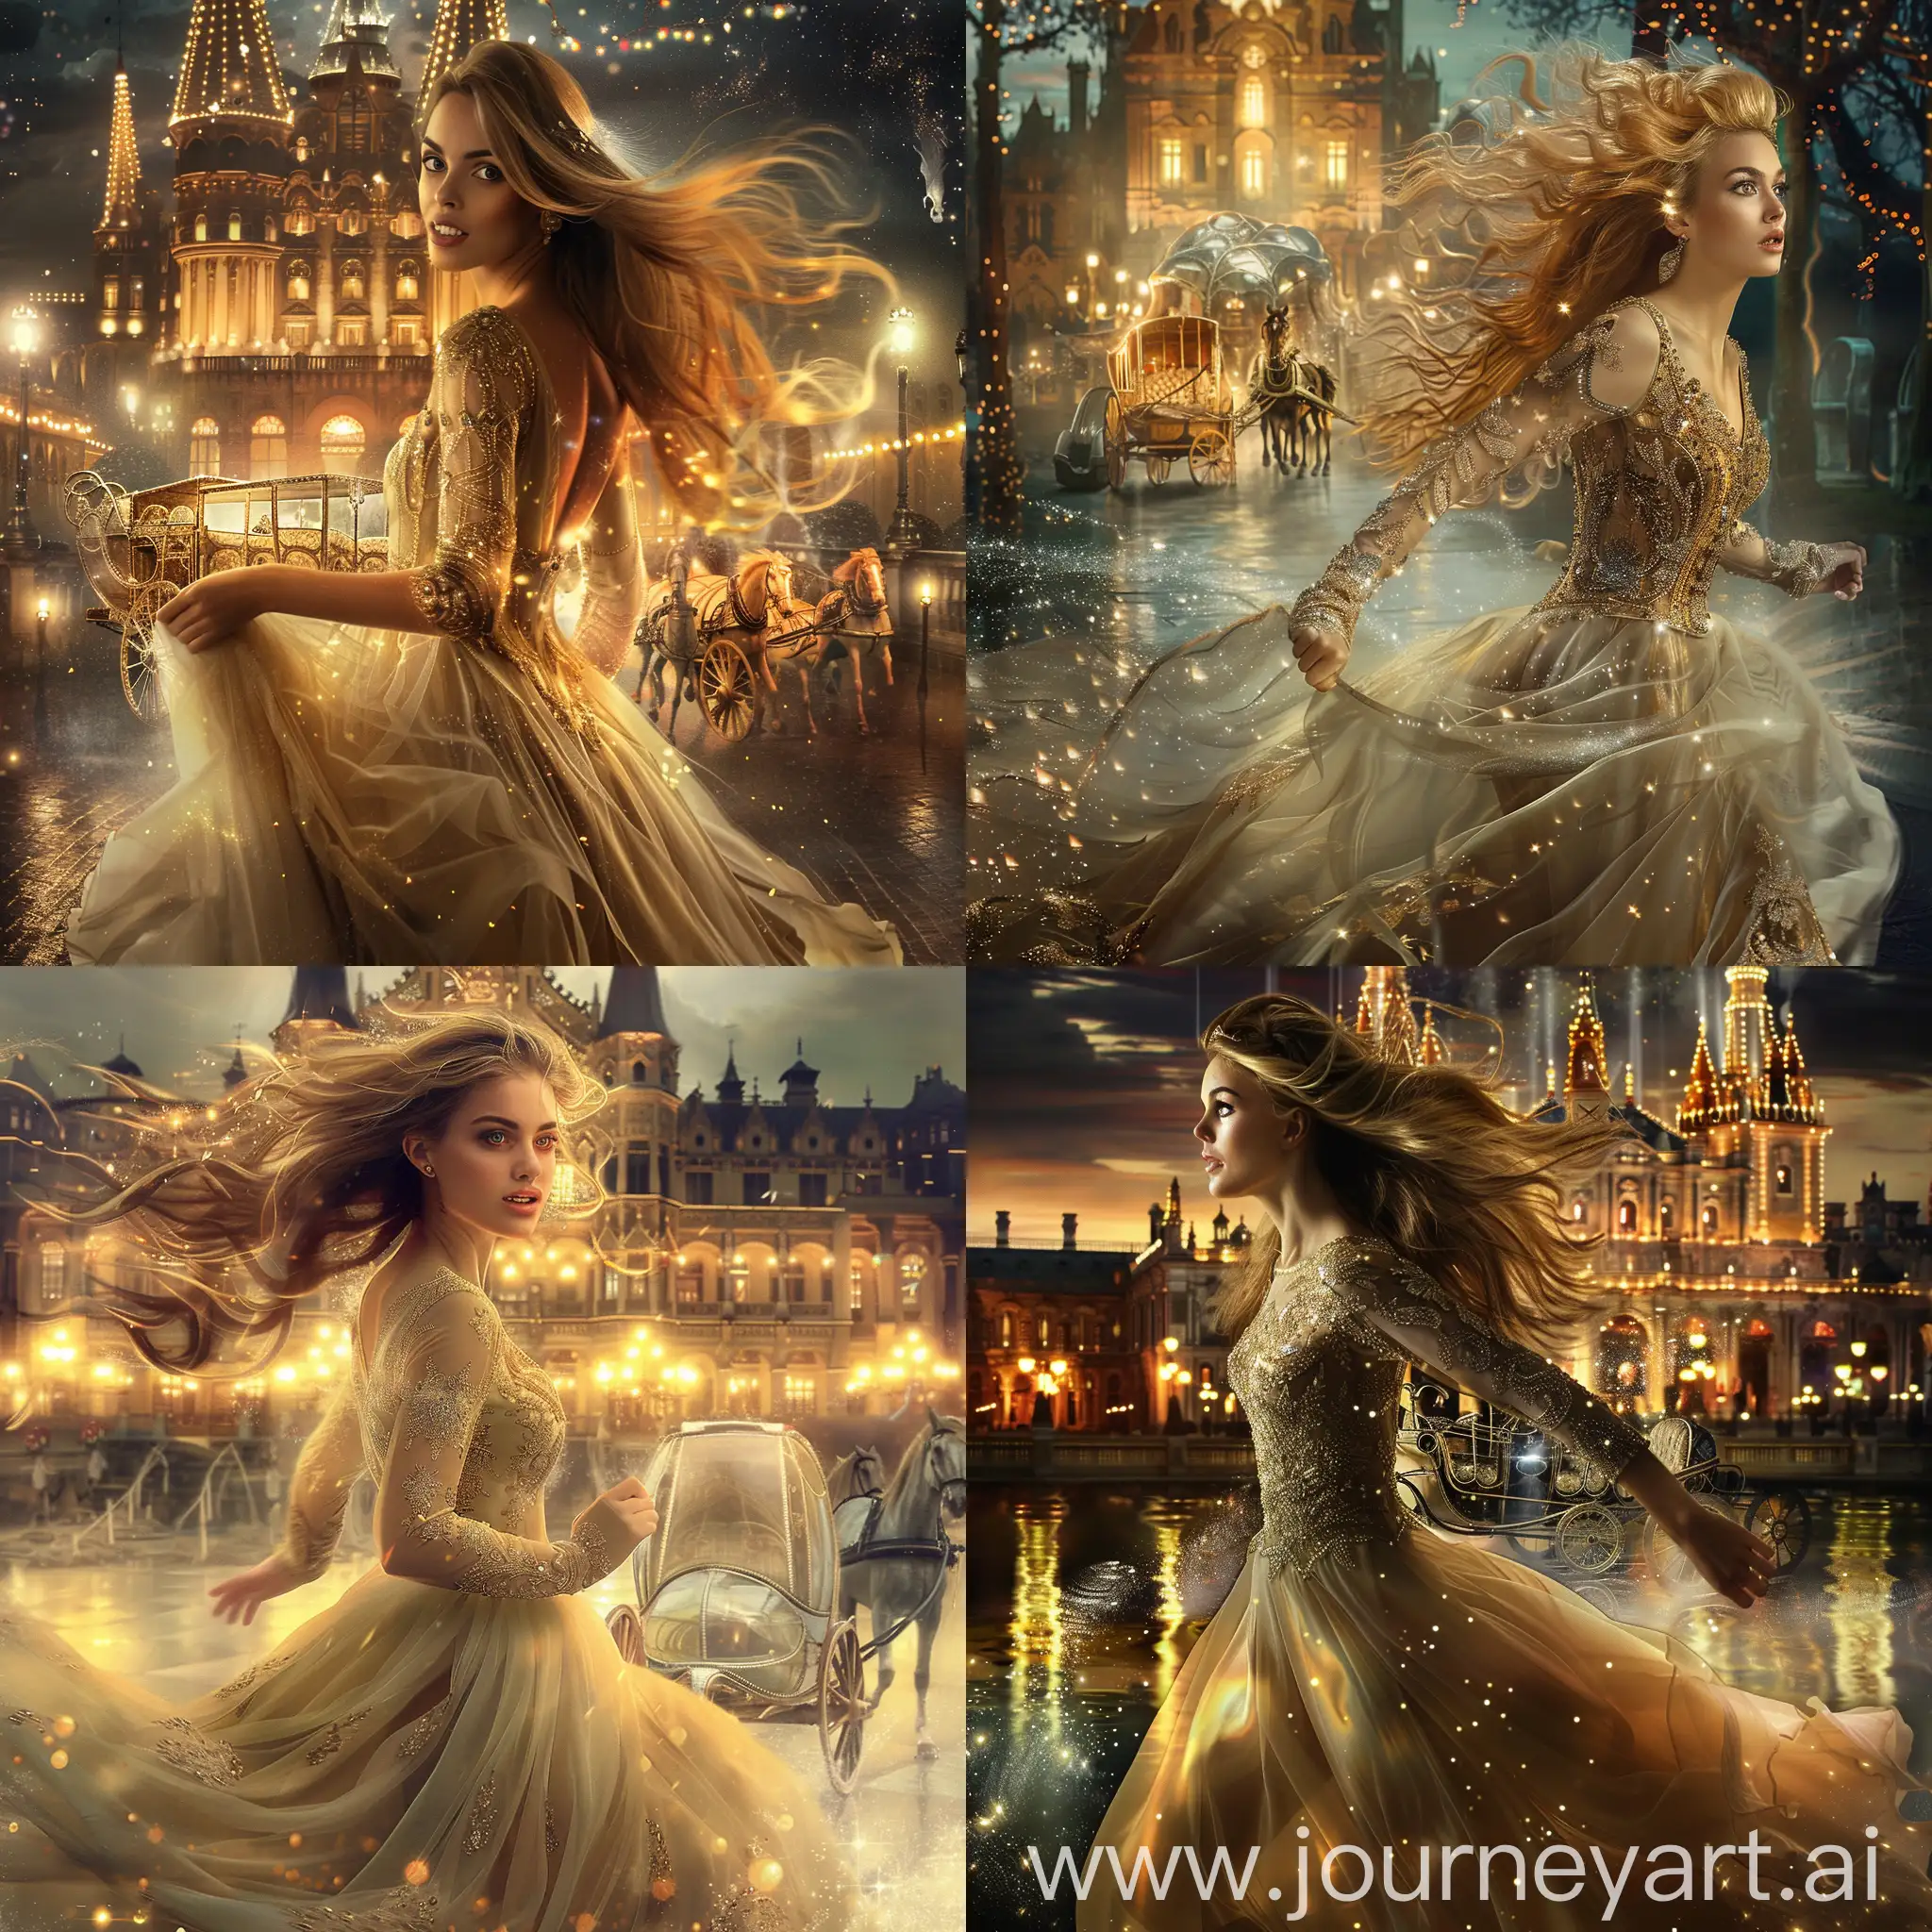 A beautiful woman with a beautiful face  long golden hair and a long Edwardian evening dress. She is running away from a ballroom. Behind her is medieval palace with lights on and a glass coach and horses outside. Beautiful magical mysterious fantasy etheral 